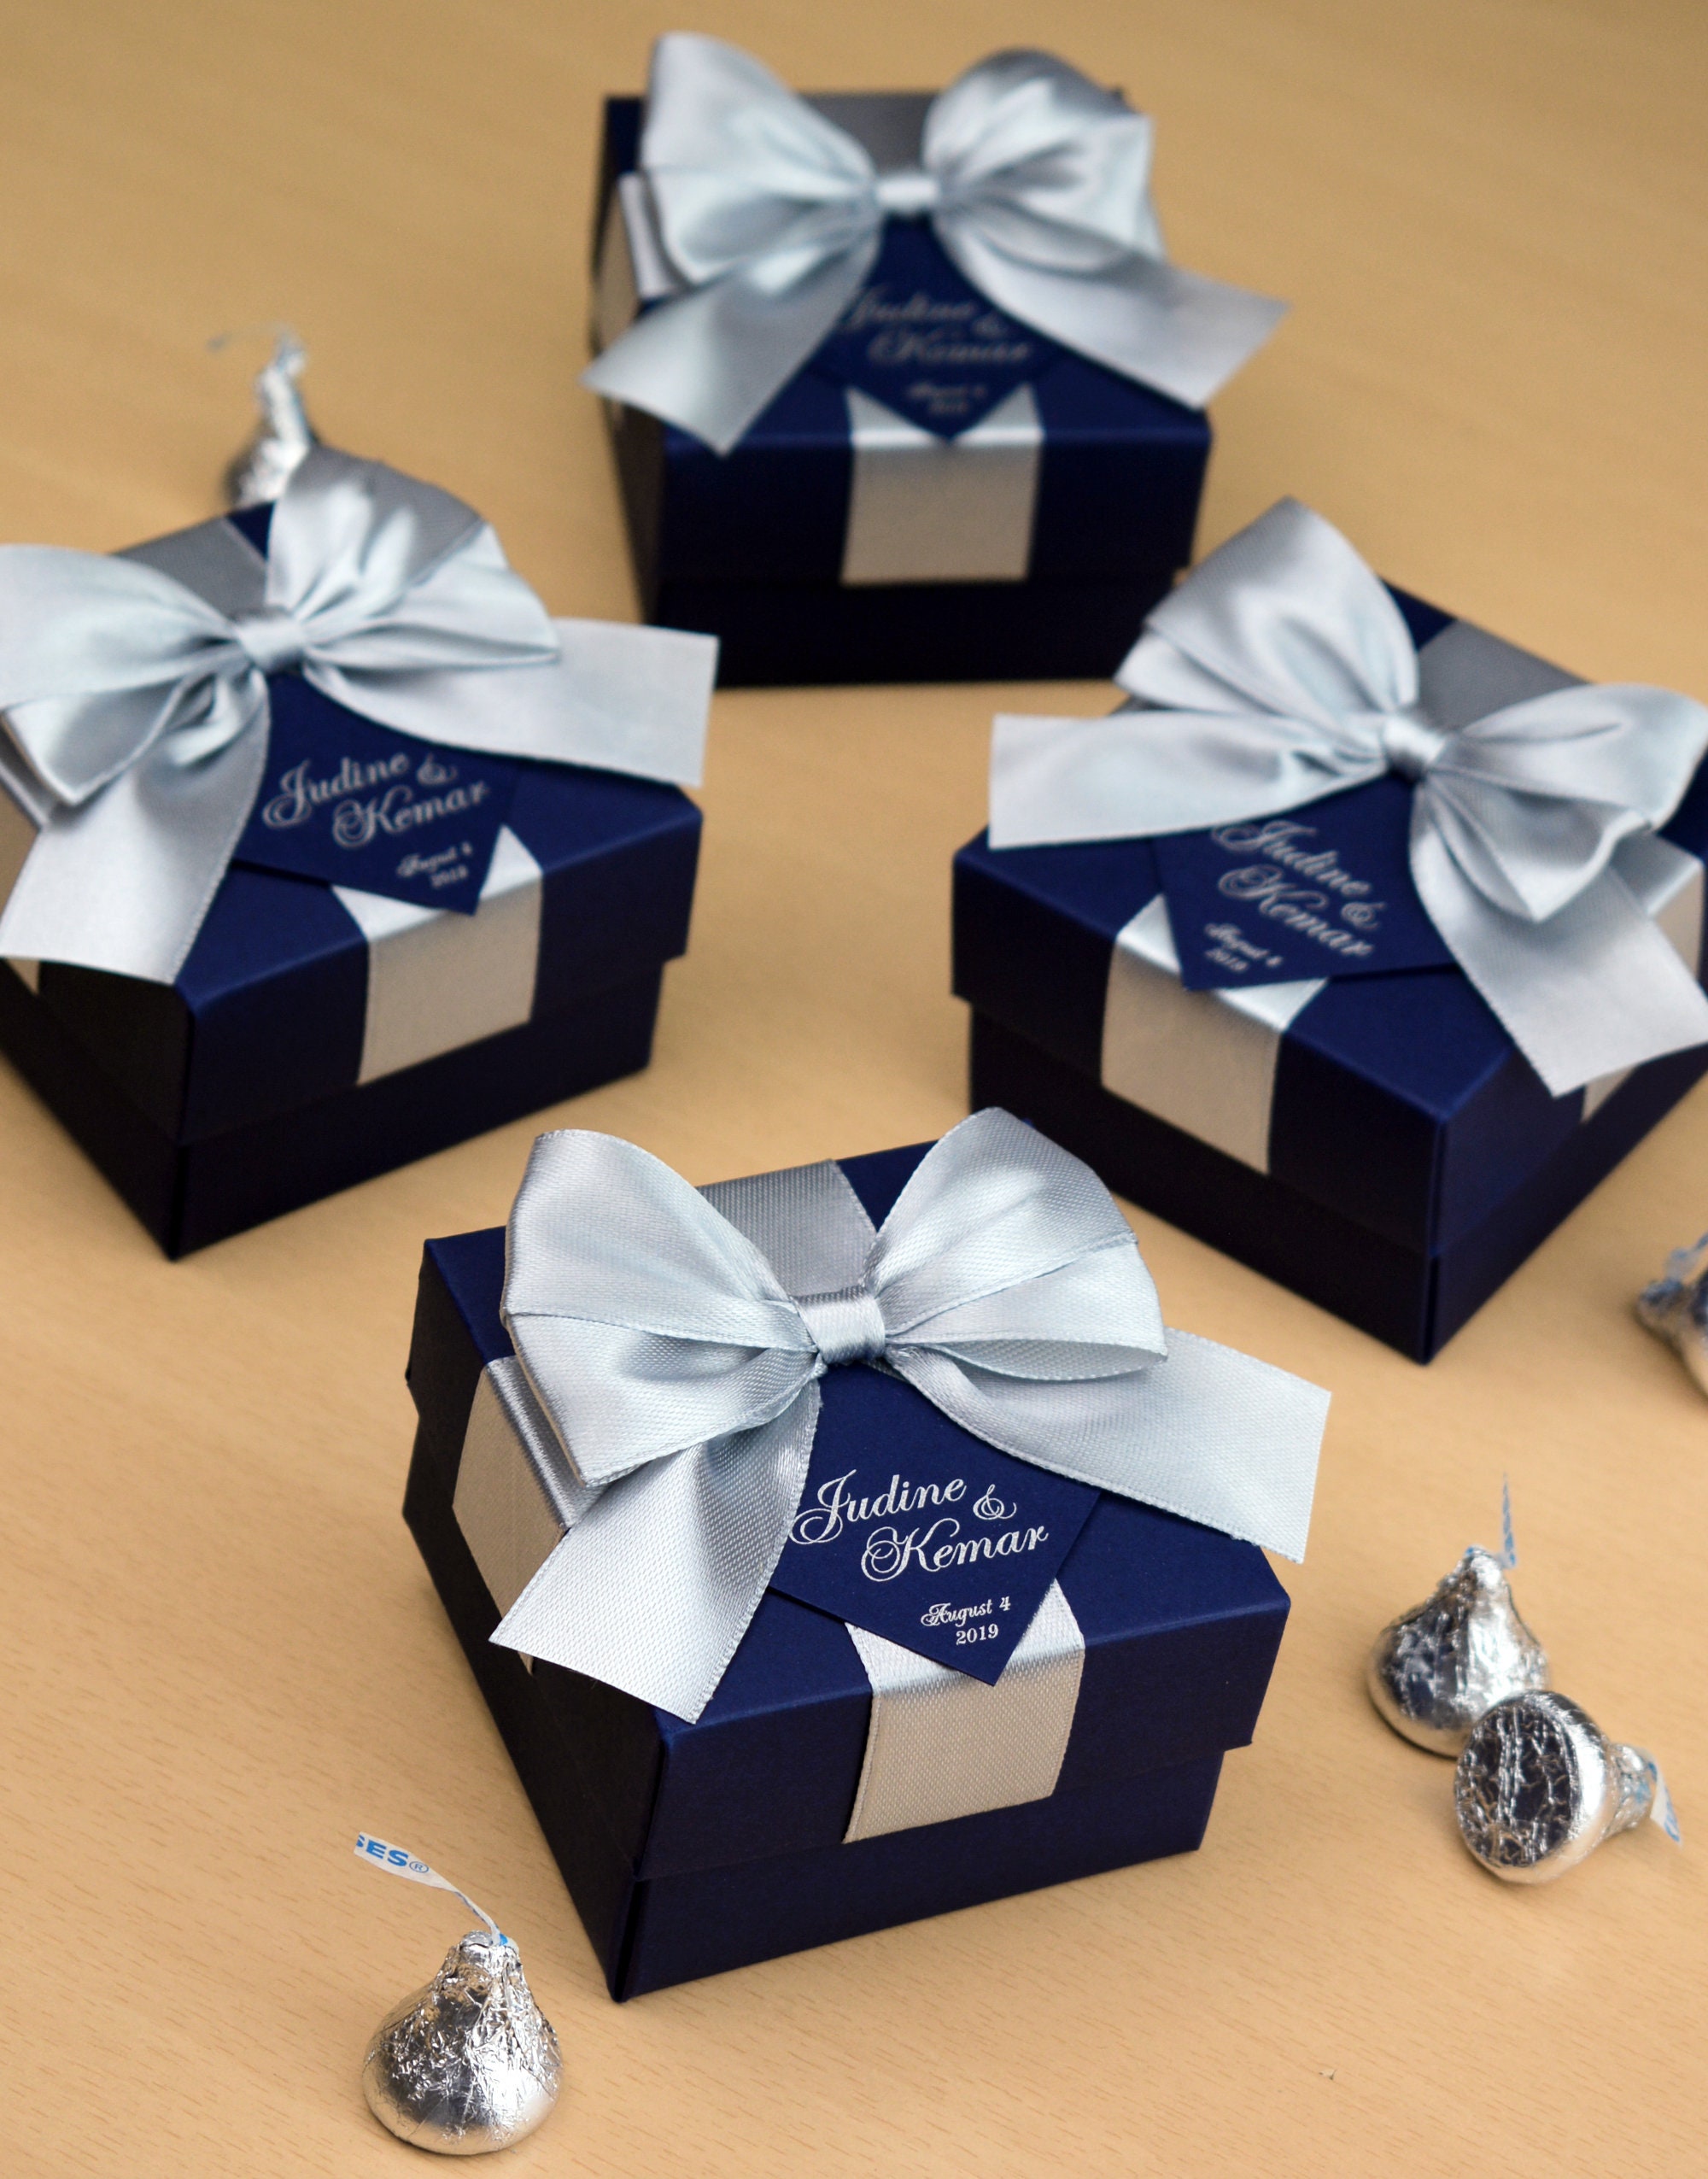 Personalized Bridal Shower Gift Ideas « blue augustine